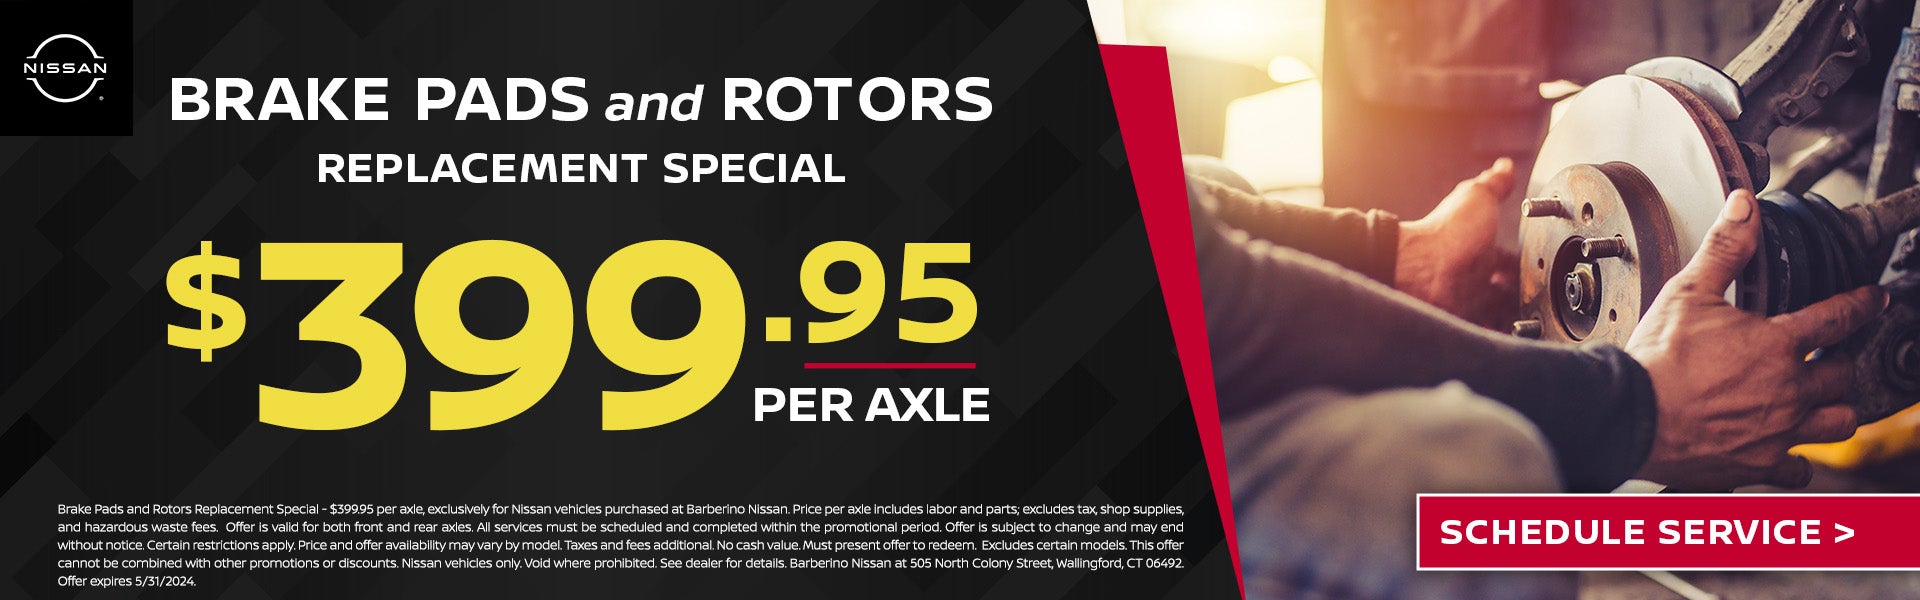 BRAKE PADS AND ROTORS REPLACEMENT SPECIAL - $399.95 PER AXLE